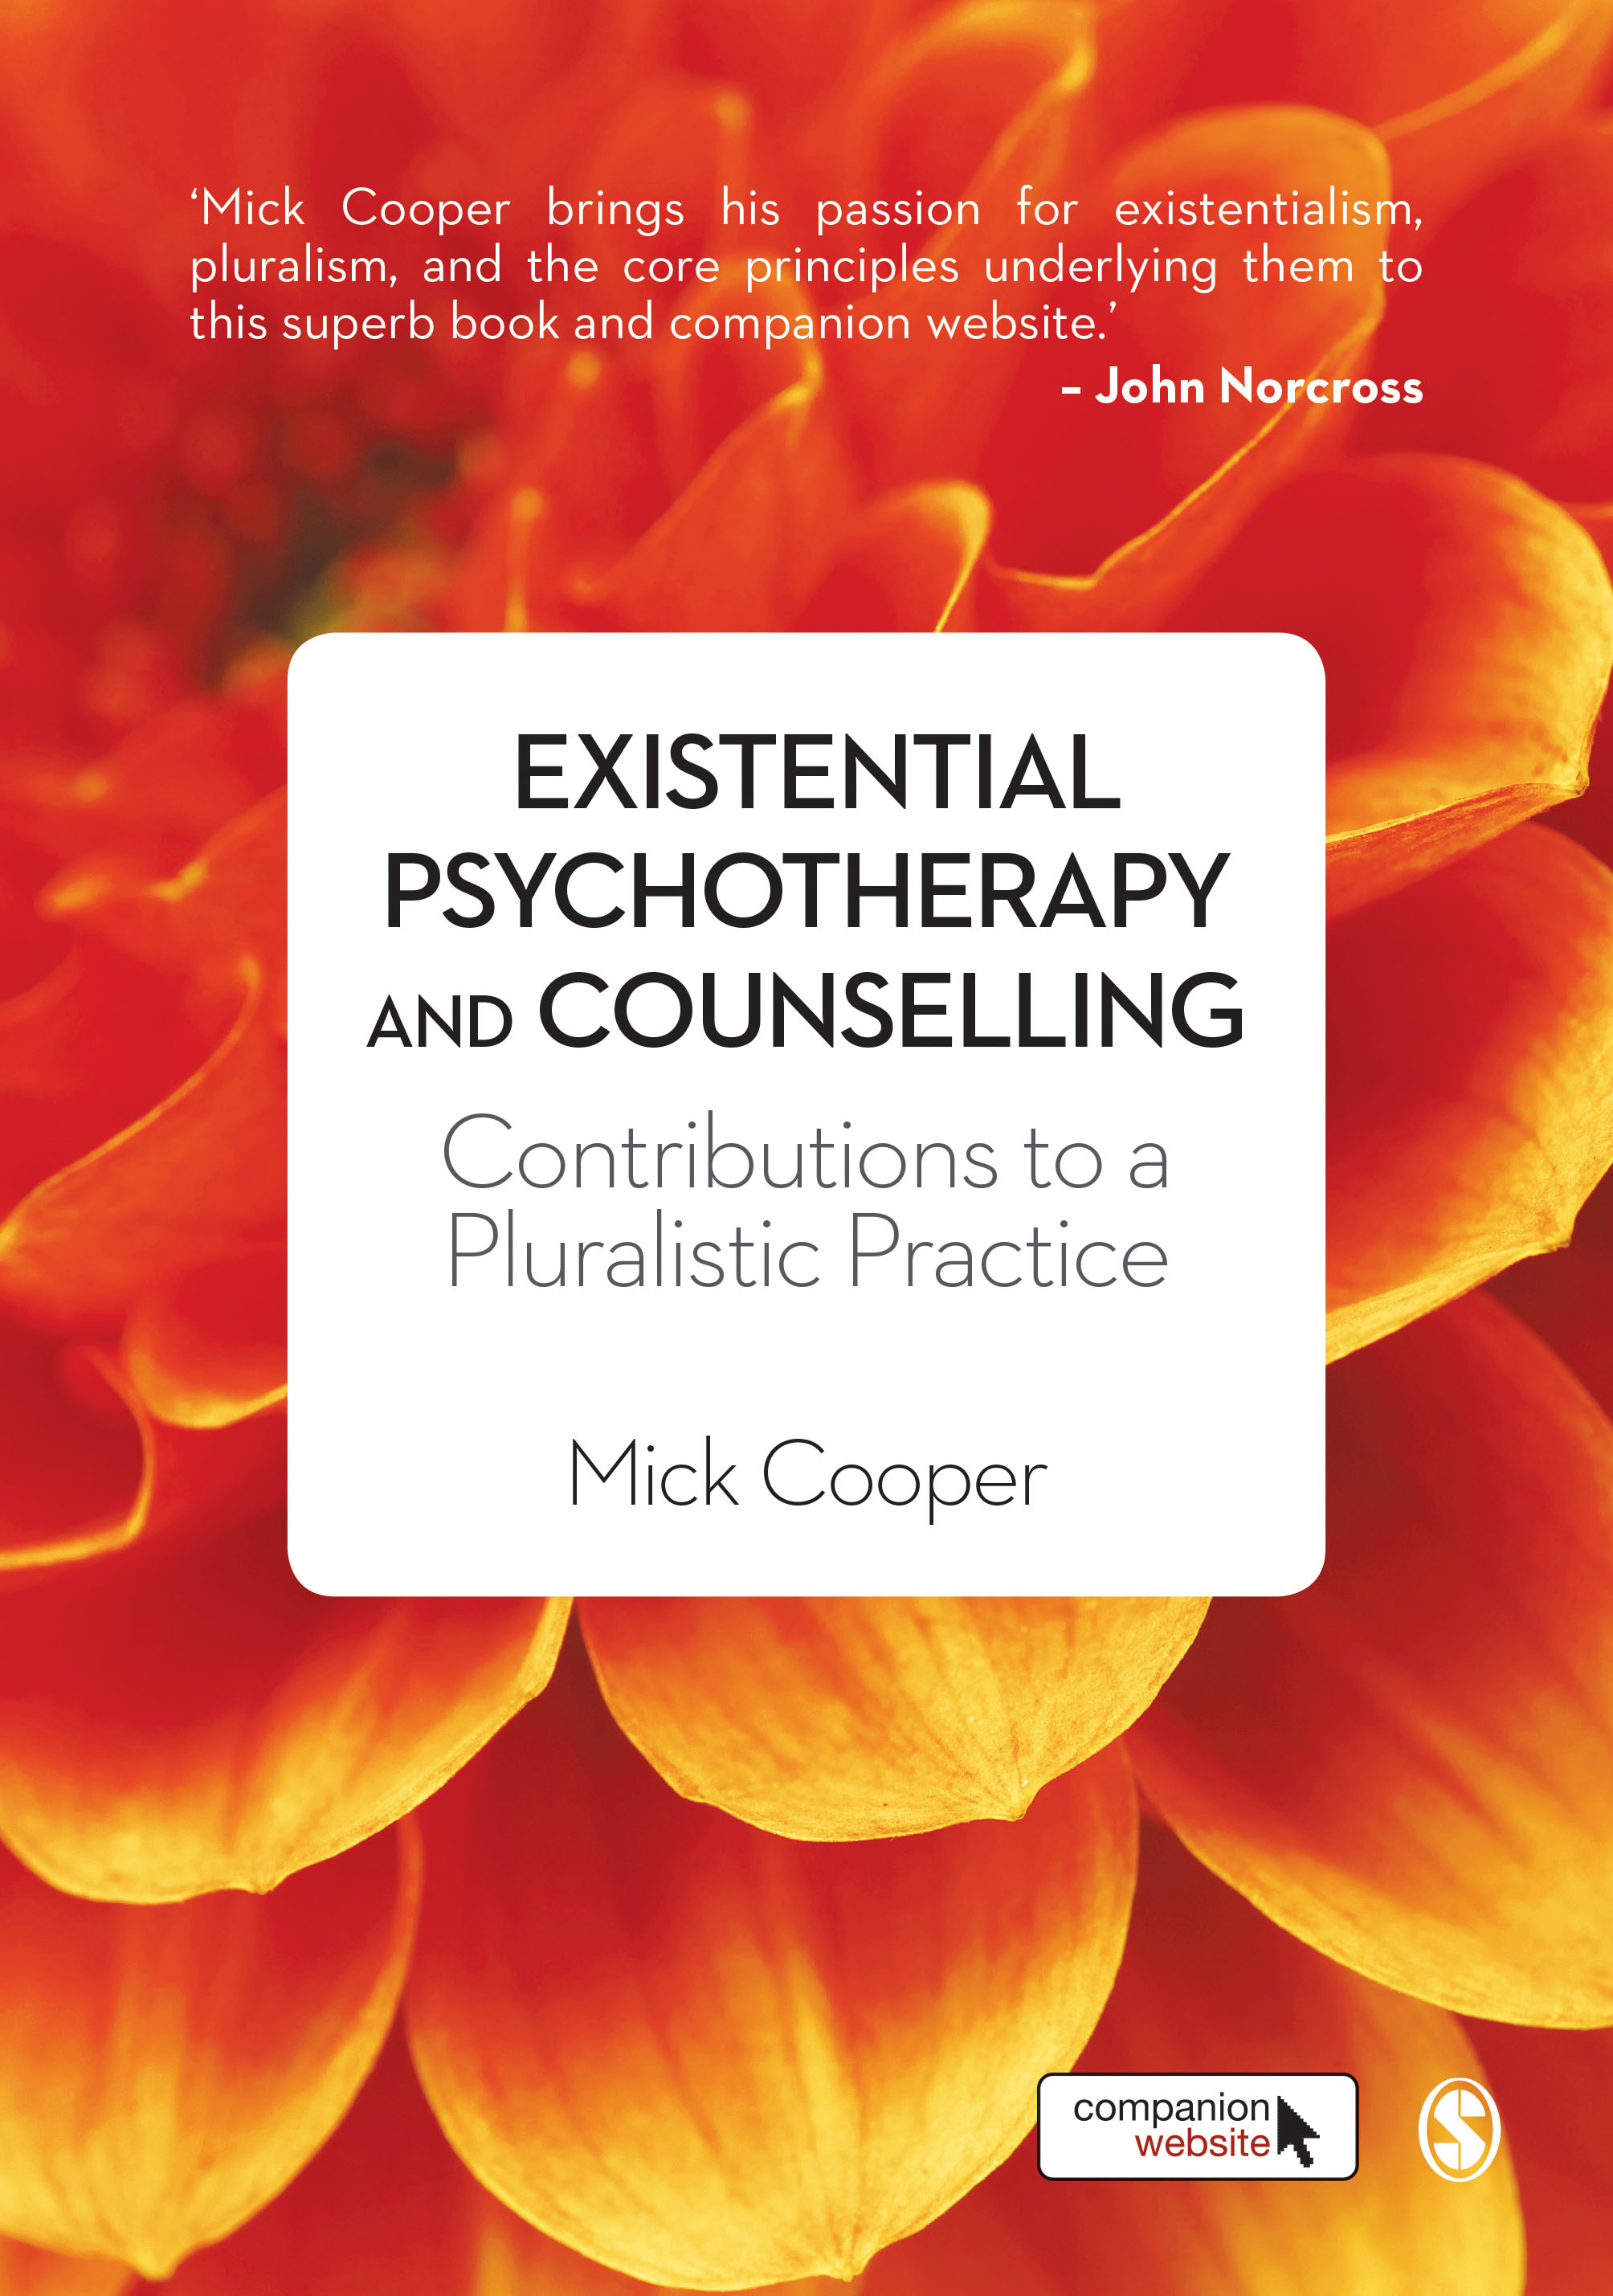 Existential psychotherapy and counselling book cover 